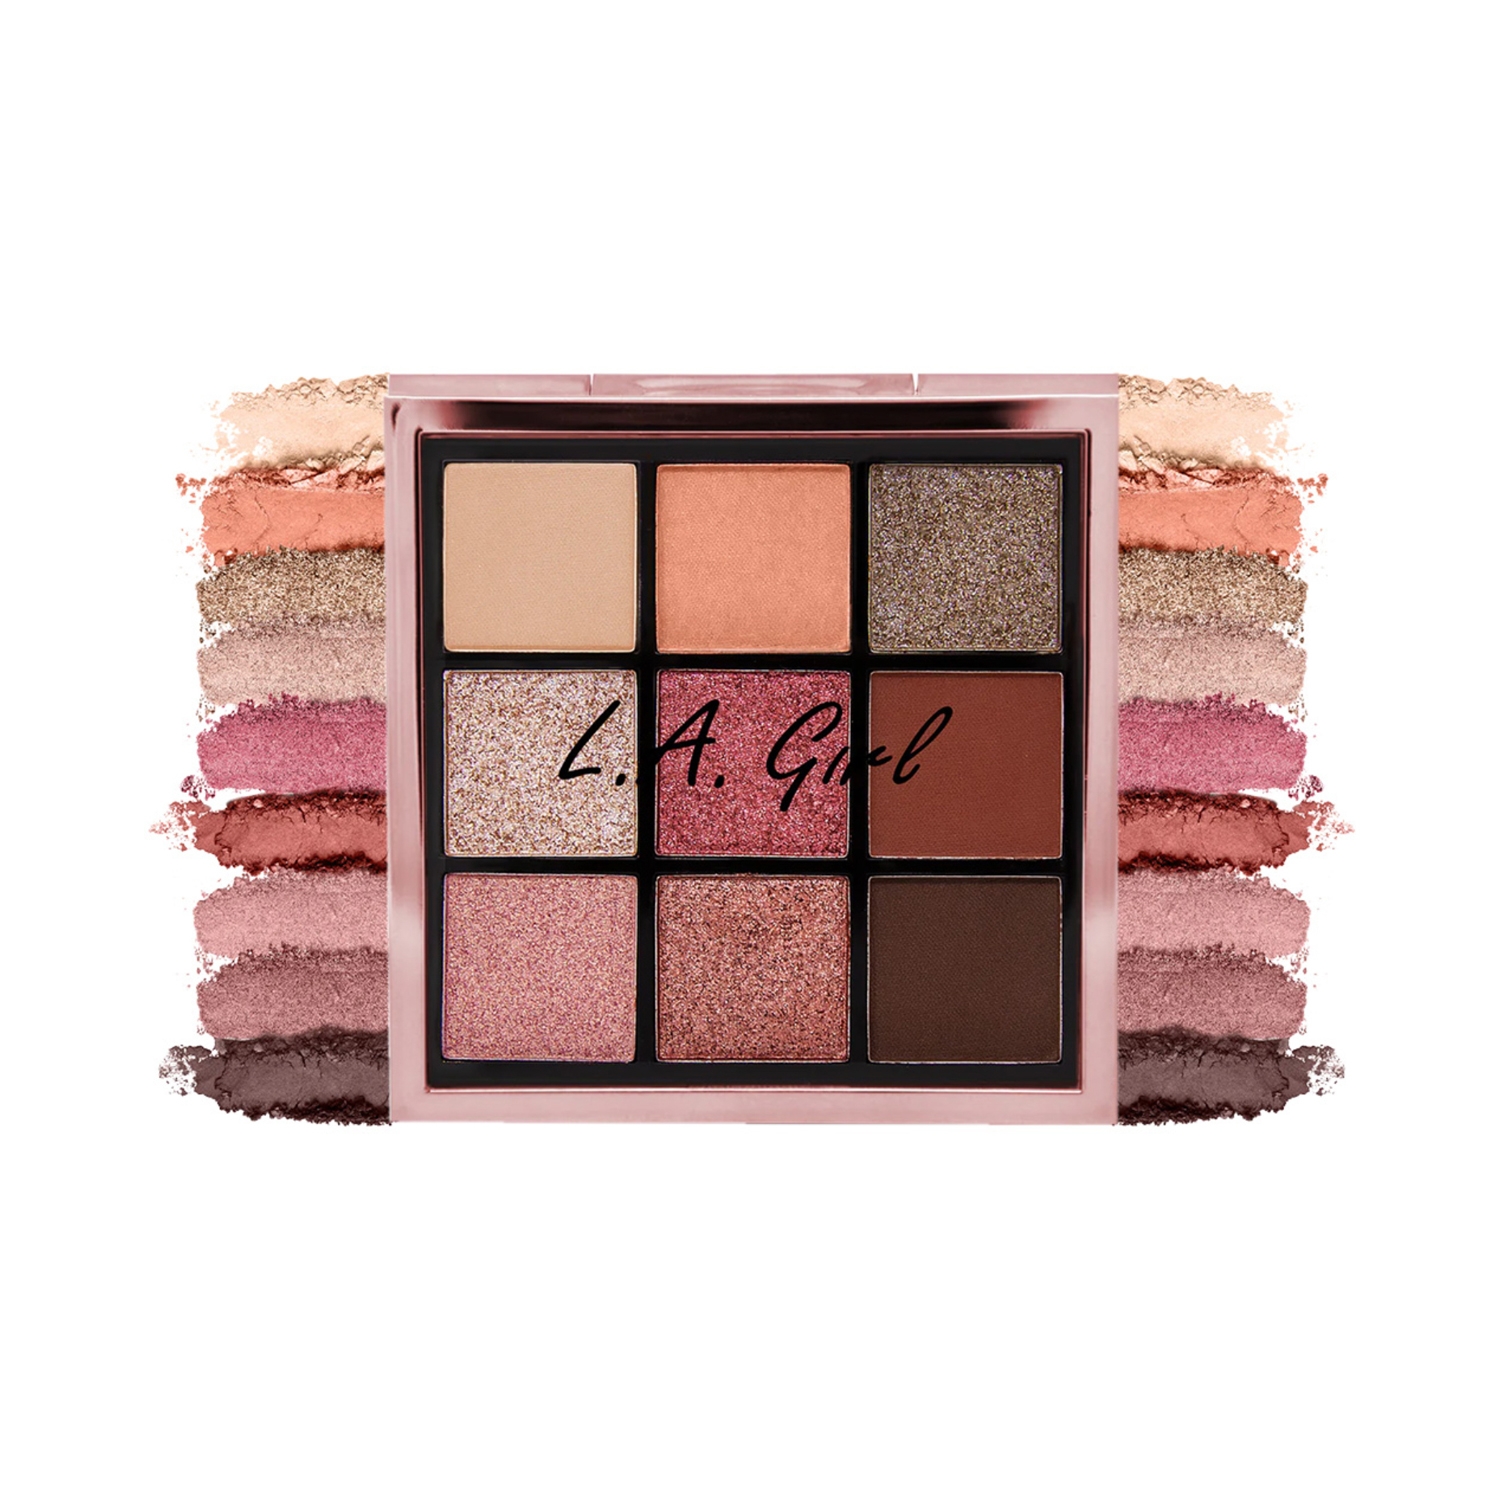 L.A. Girl | L.A. Girl Keep It Playful 9 Color Eyeshadow Palette - GES434 Playmate (14g)